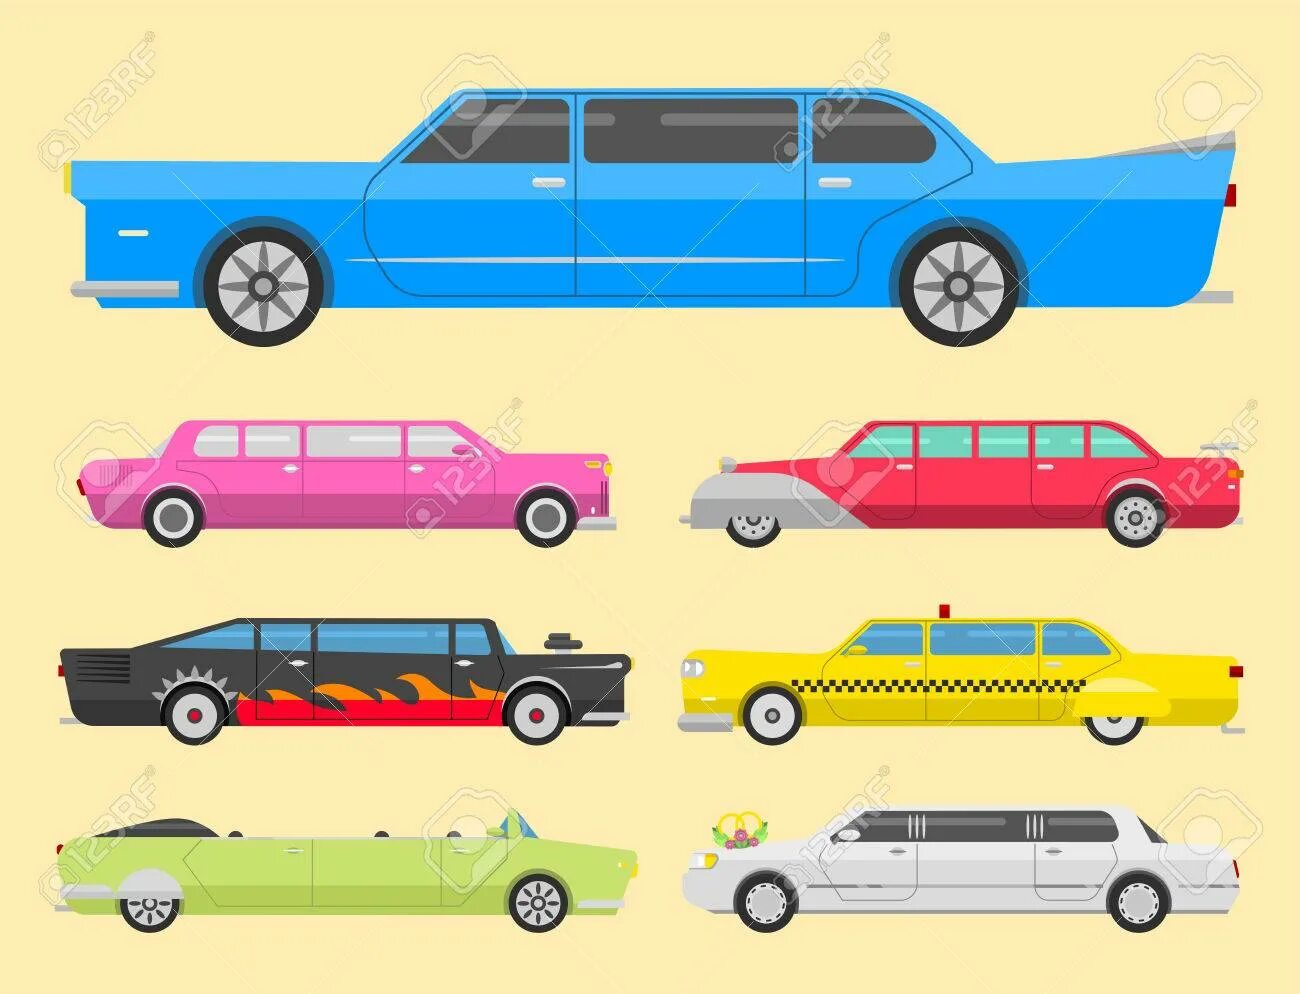 Exquisite limousine coloring book for kids